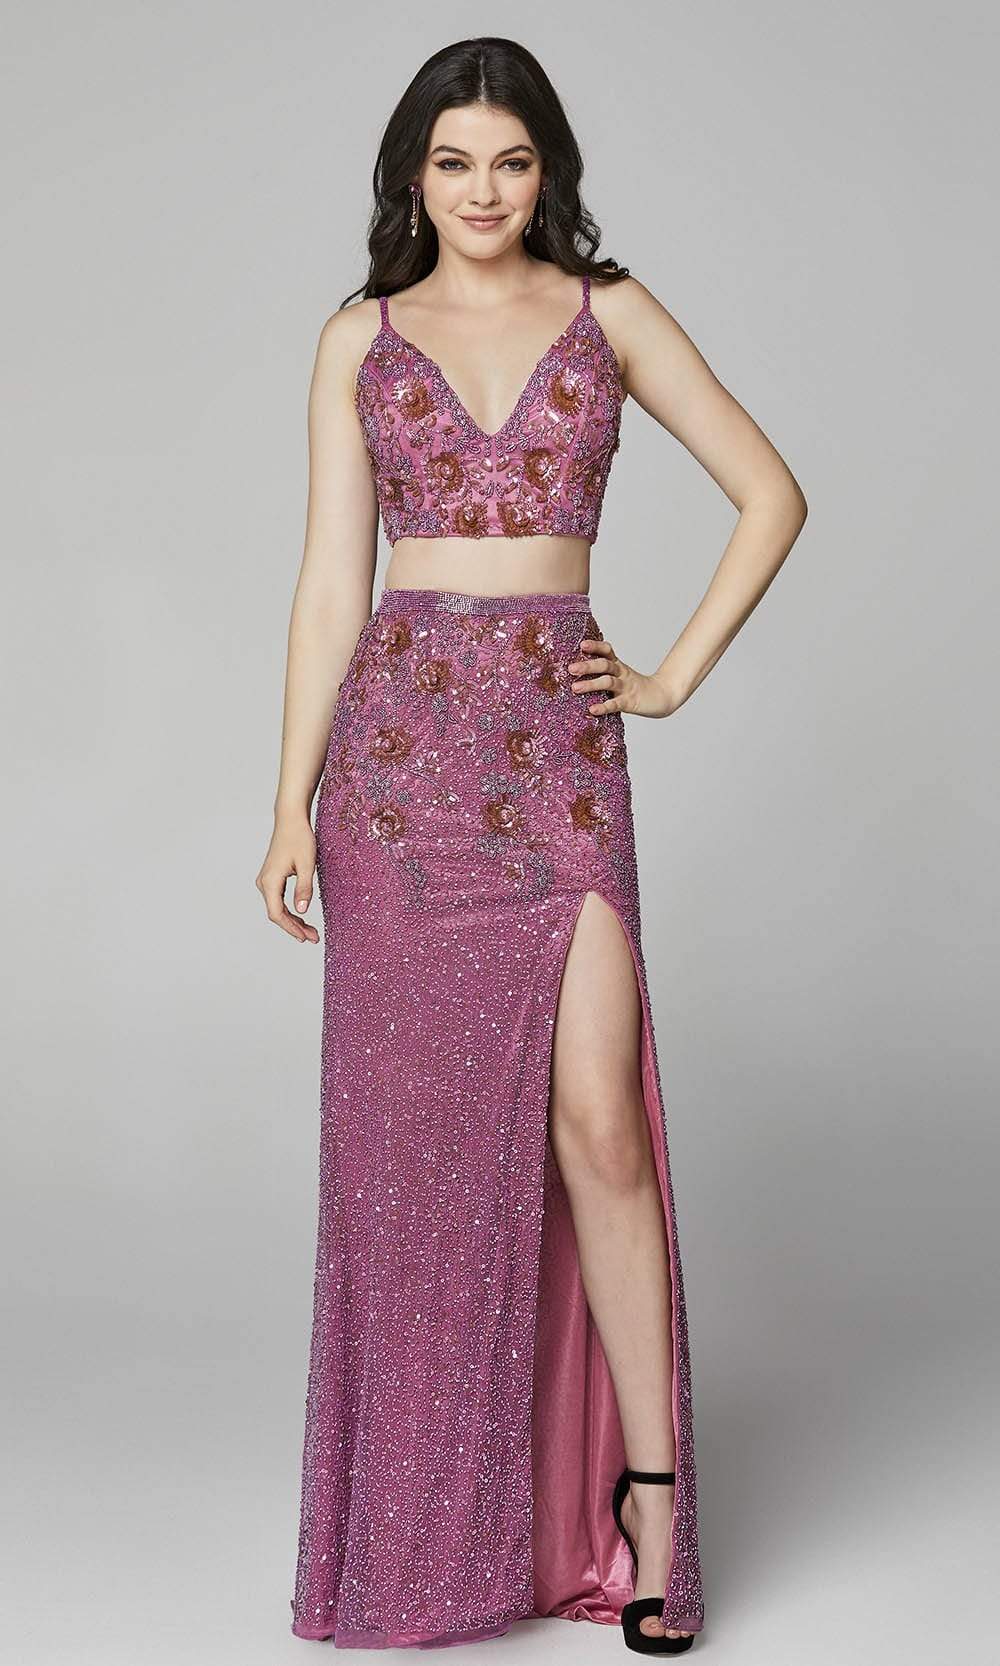 Primavera Couture - 3647 Two Piece Plunging V Neck Dress Prom Dresses 00 / Raspberry